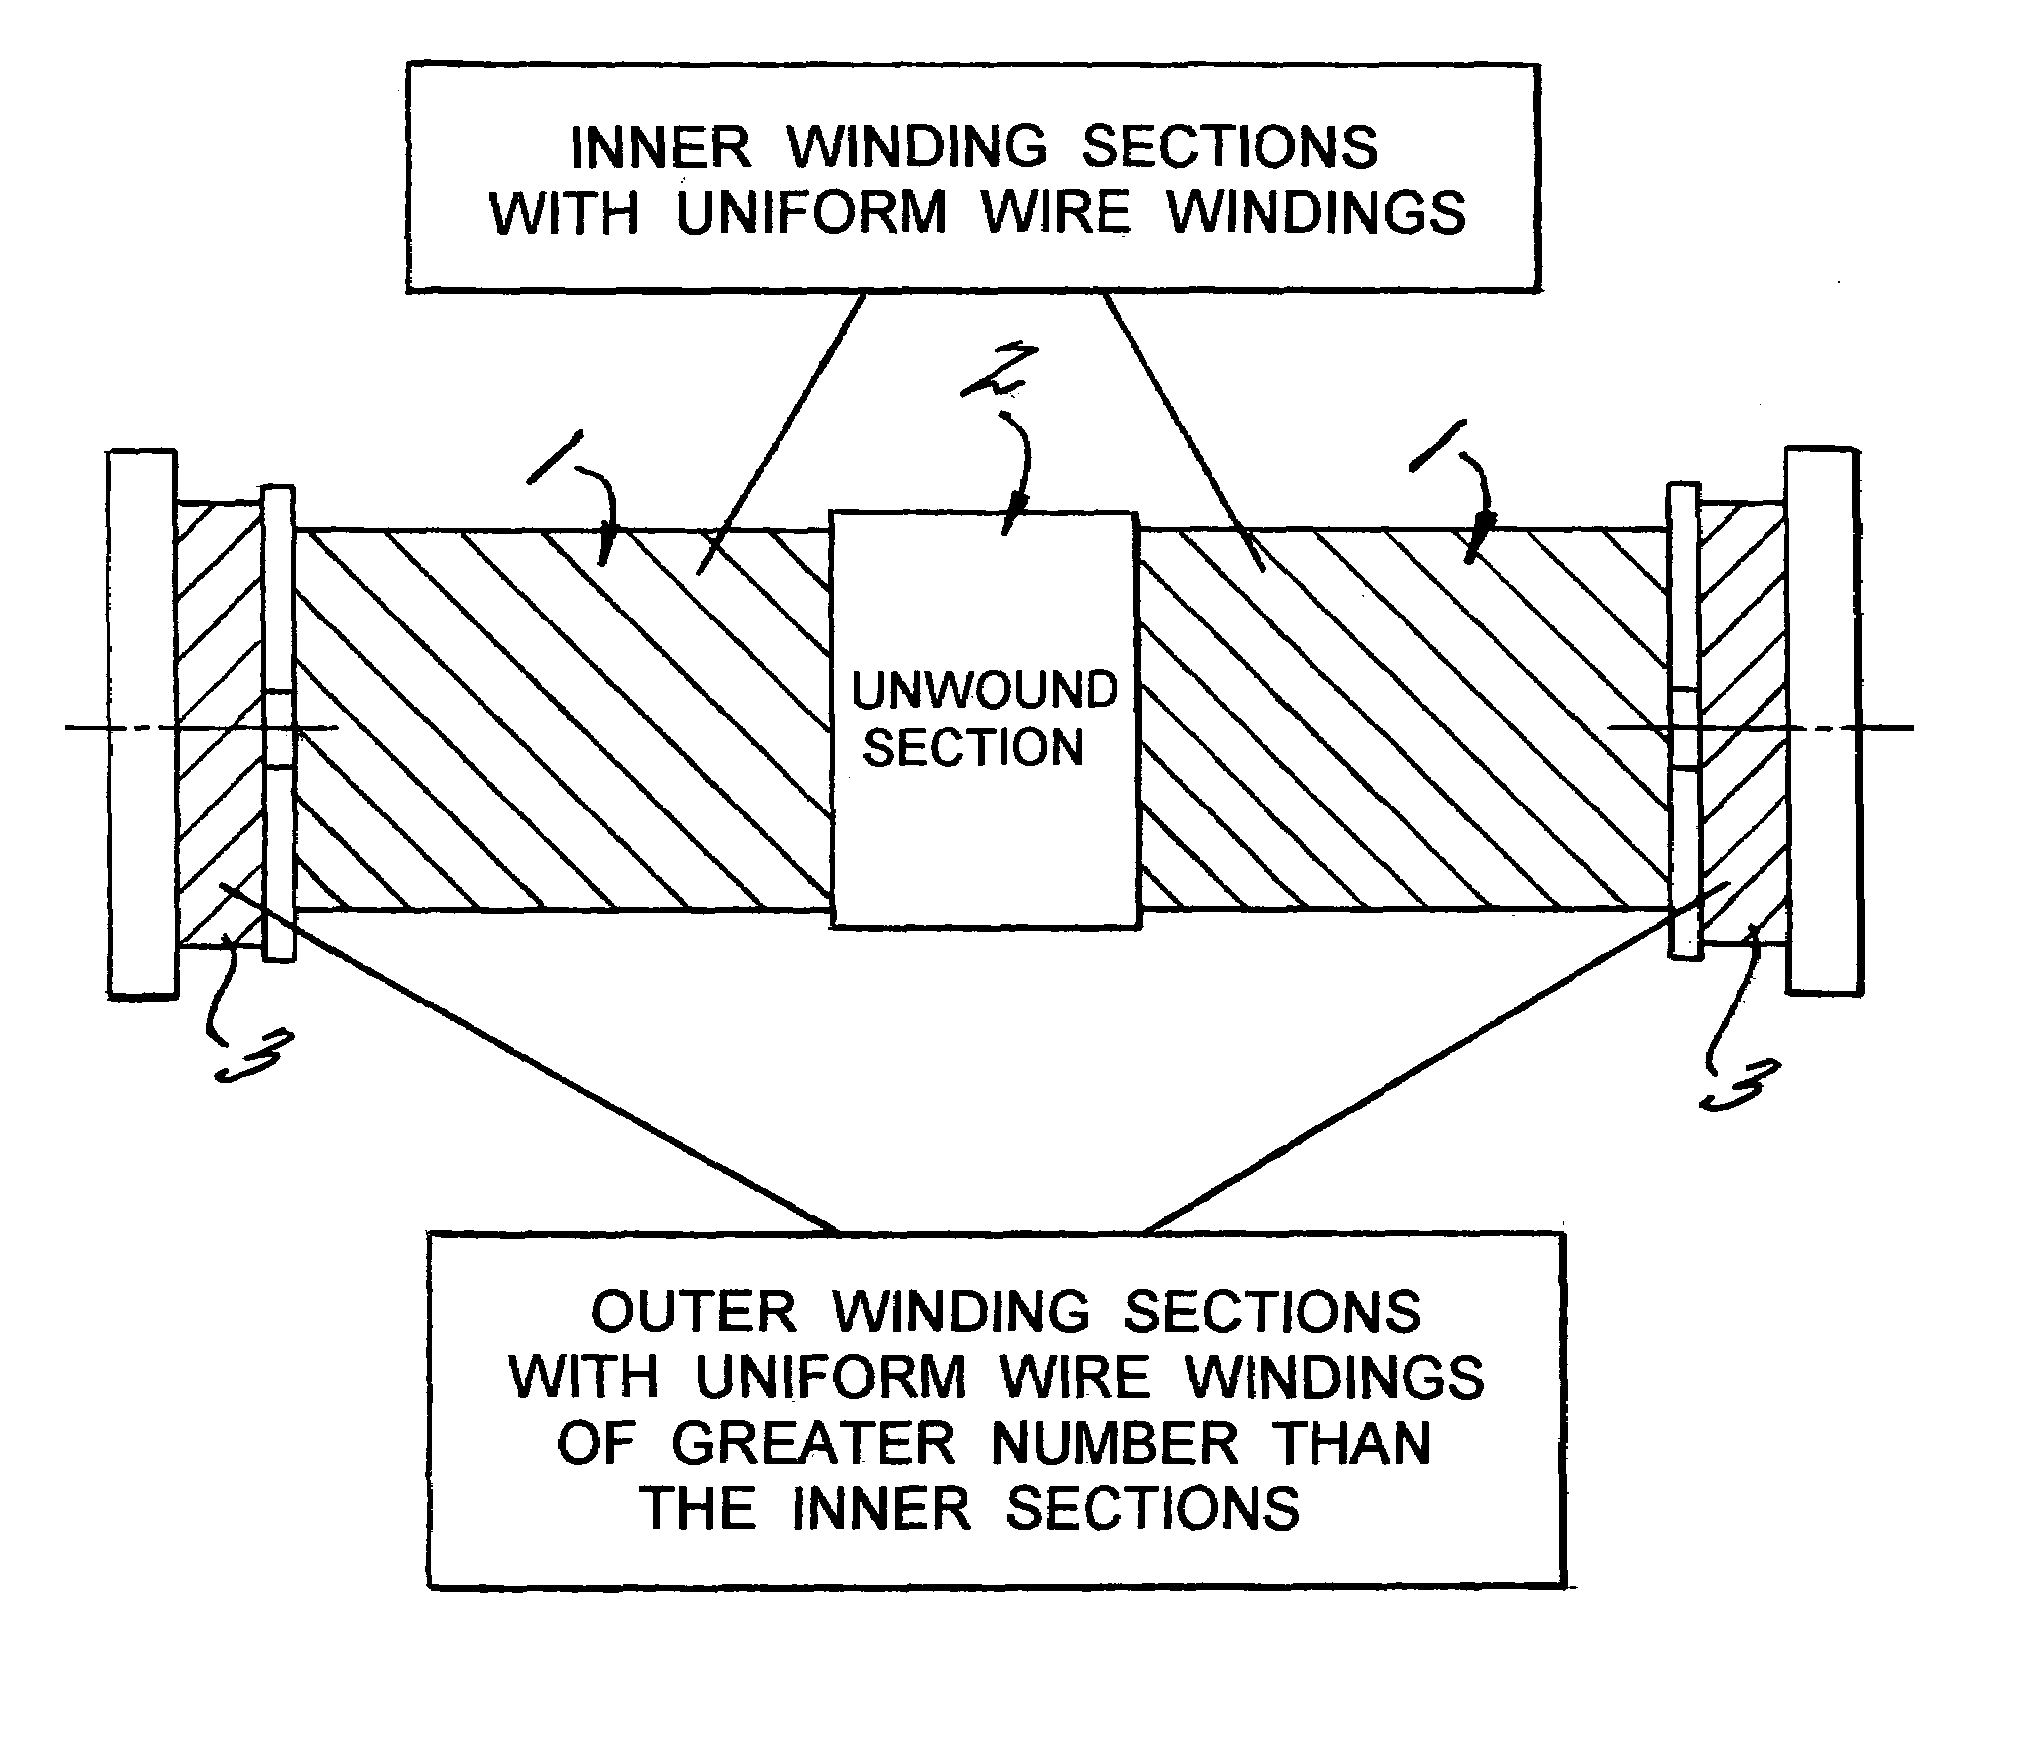 Displacement sensor with inner and outer winding sections